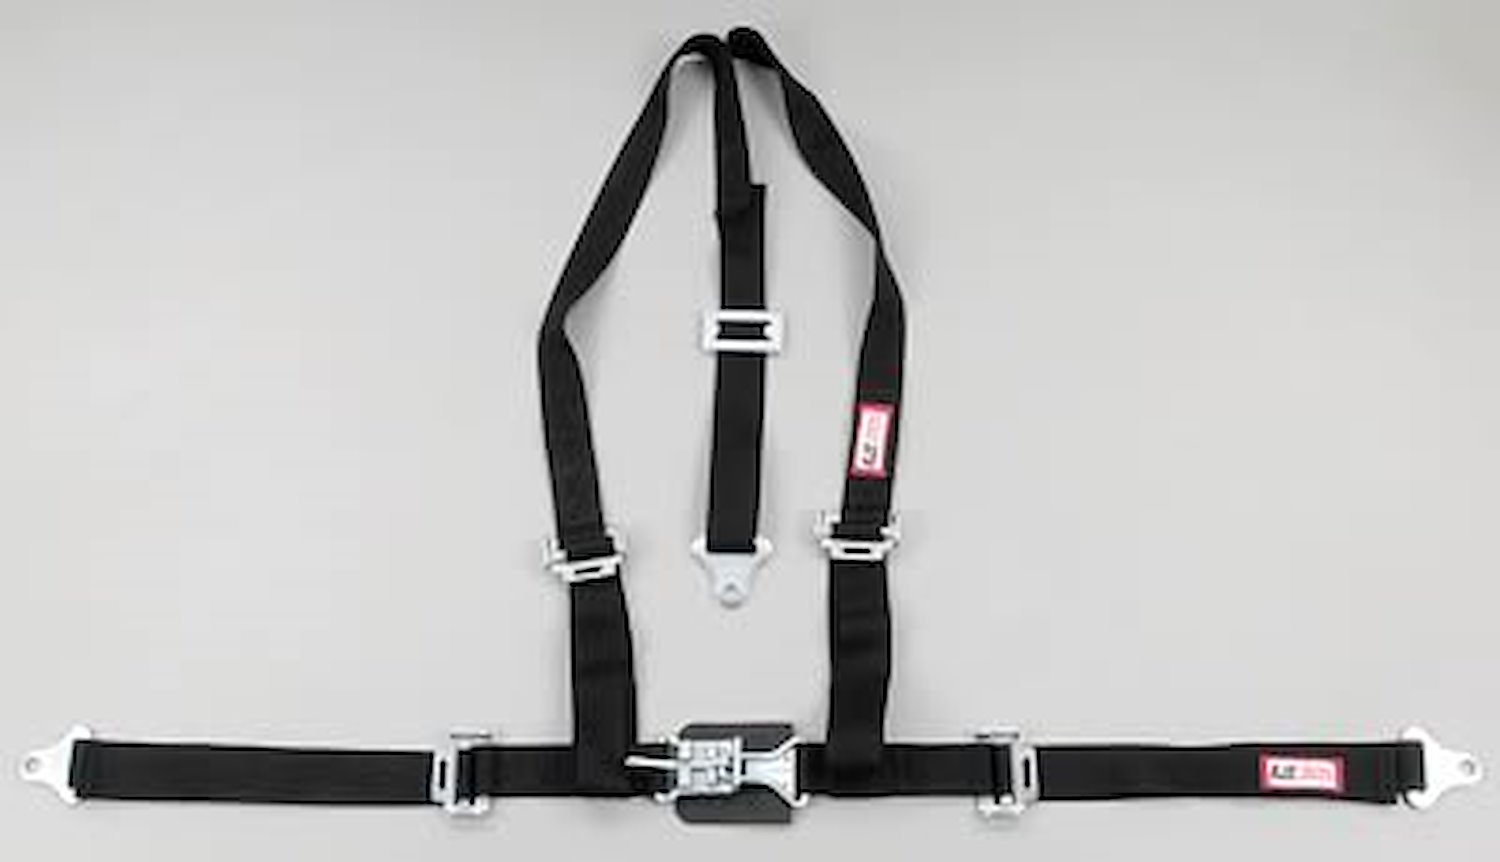 NON-SFI L&L HARNESS 3 PULL UP Lap Belt w/adjuster 2 S.H. Y FLOOR Mount ALL WRAP ENDS BLUE